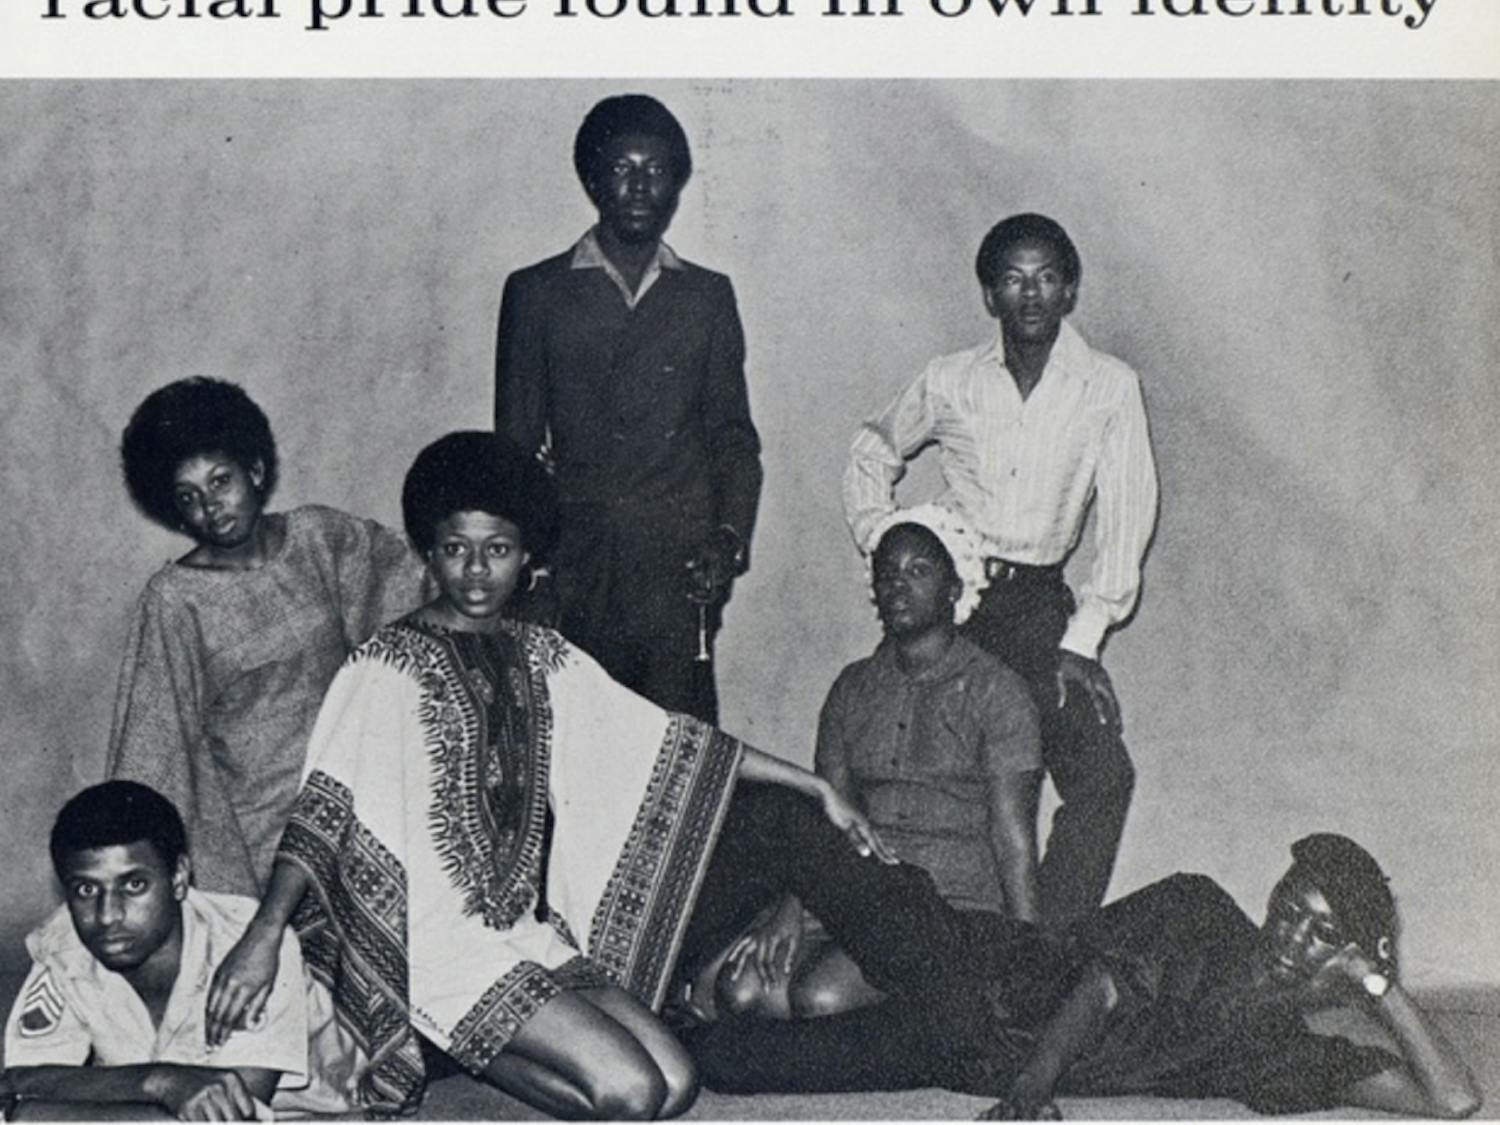 Black UF students pose for a photo in the 1970 university yearbook. The UF African American Studies program was founded in 1969. 